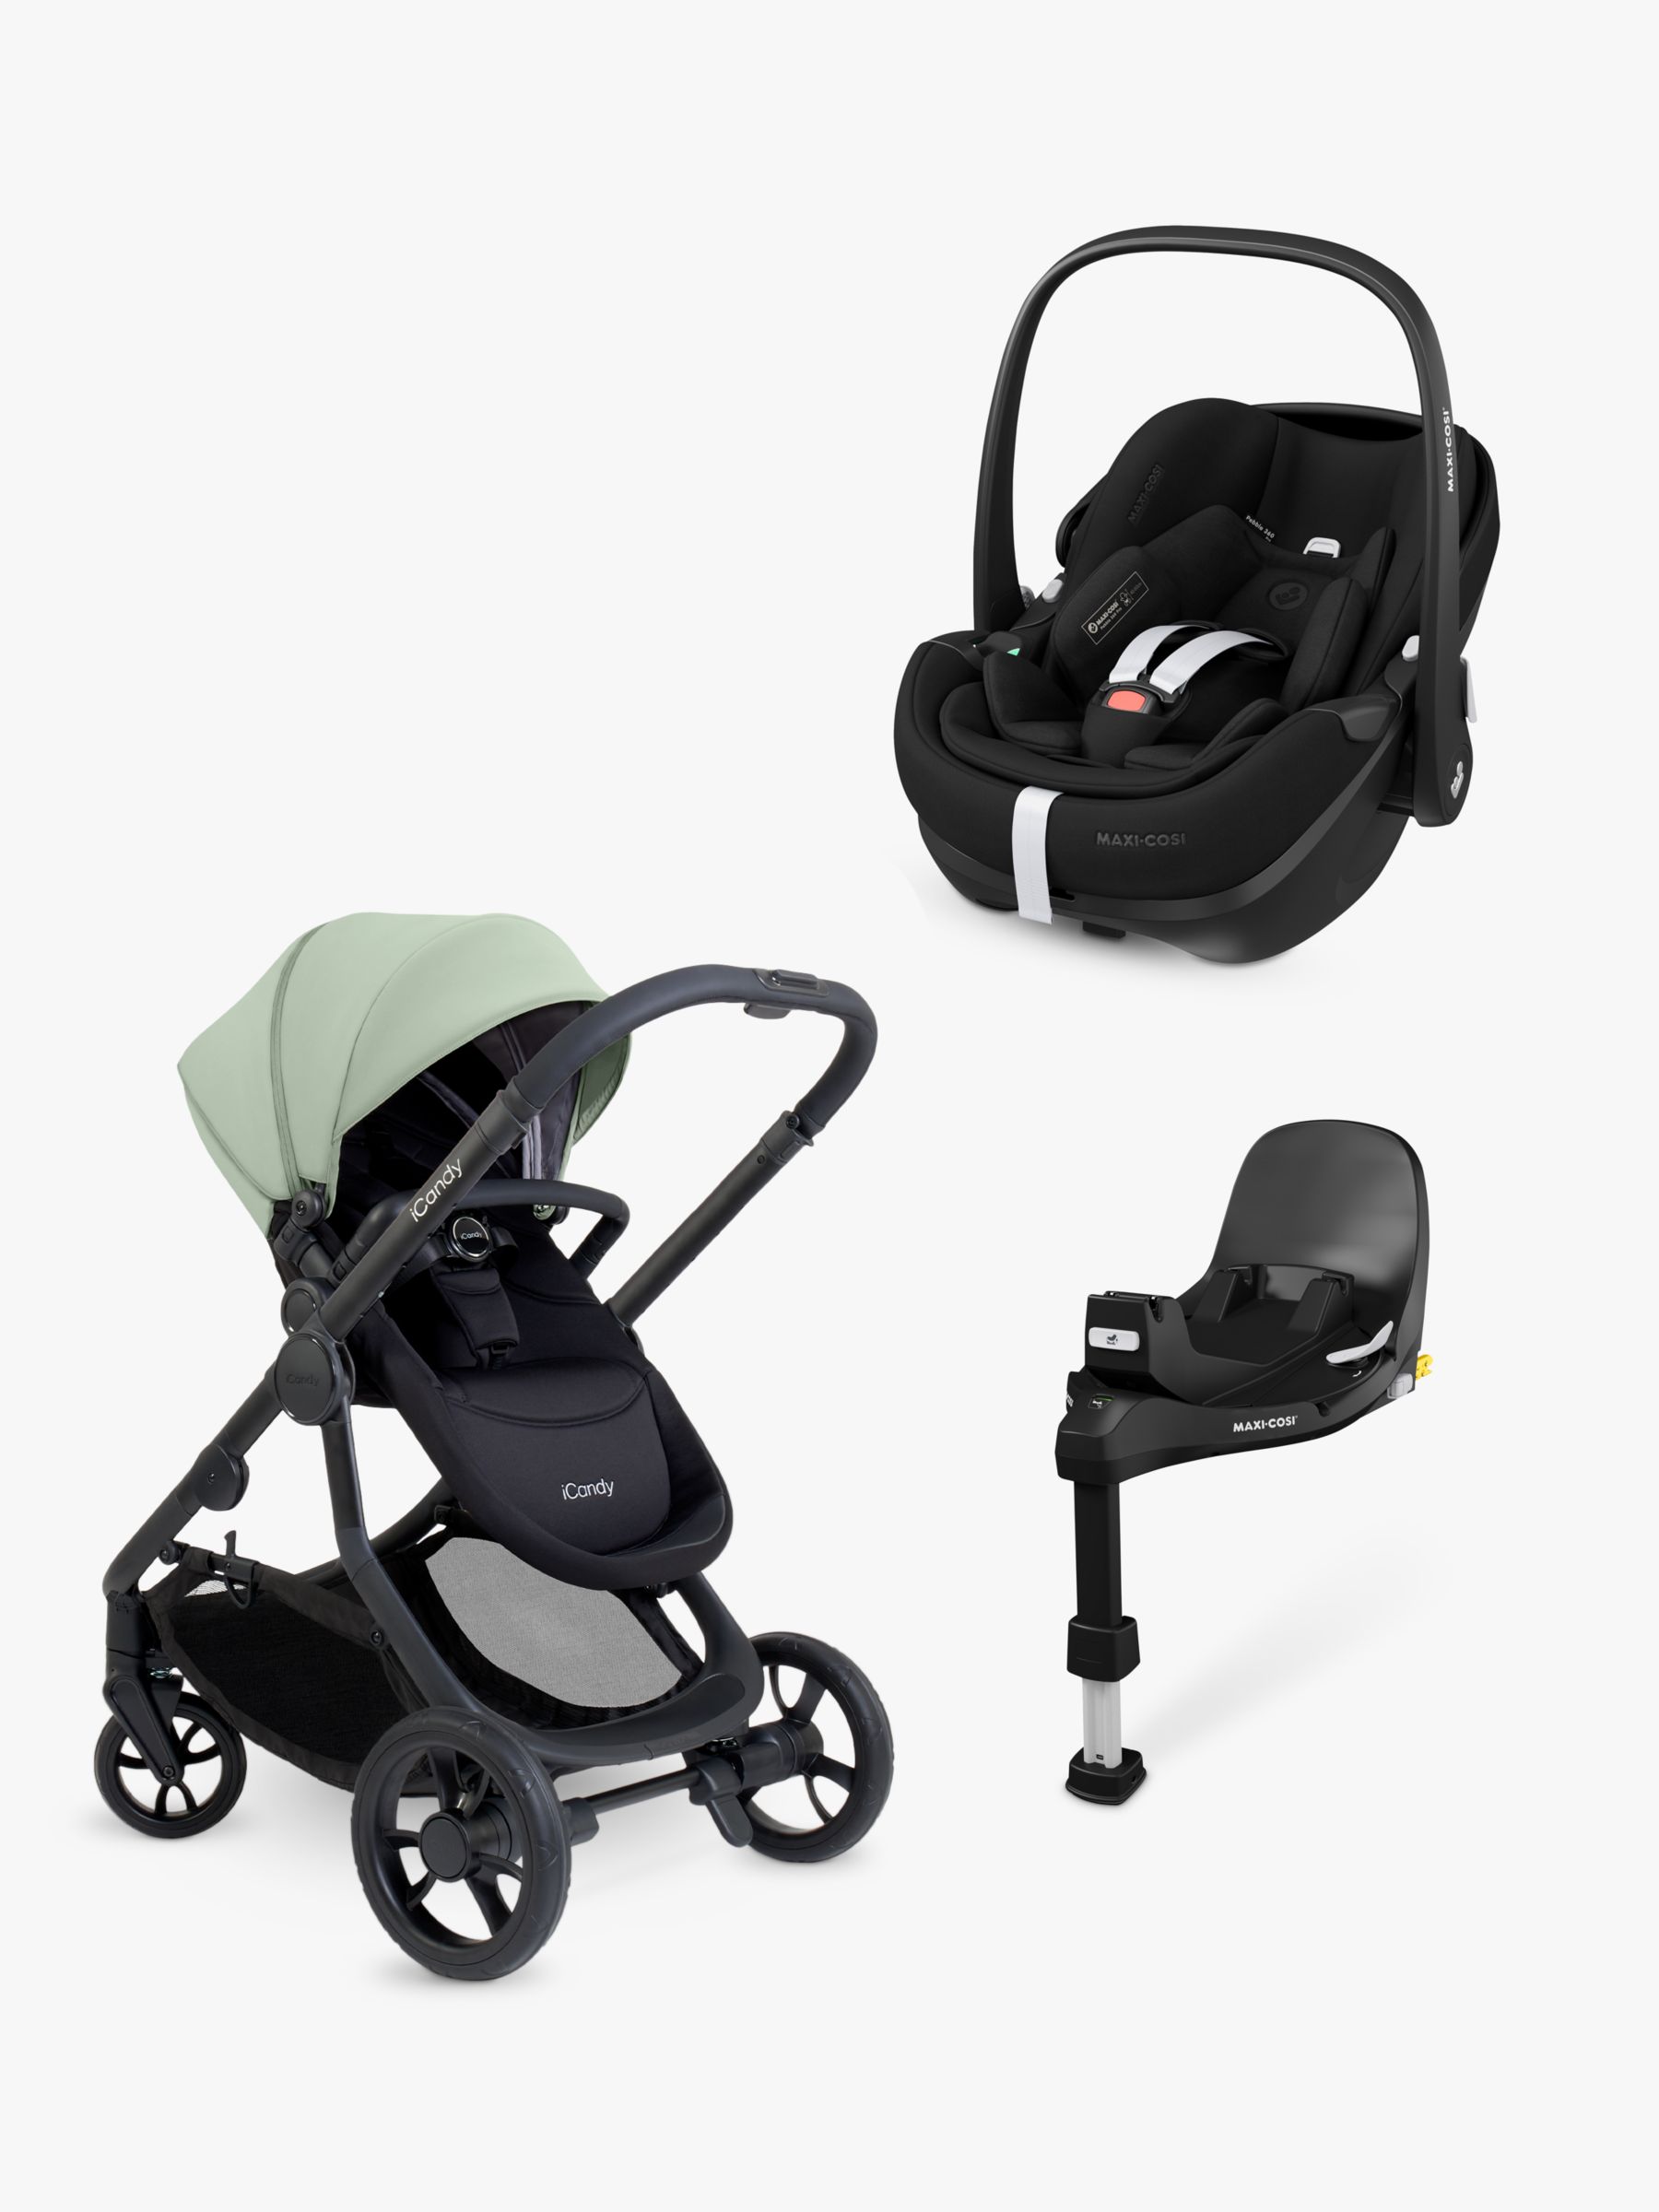 iCandy 4 Pushchair with Maxi-Cosi Pebble 360 Pro i-Size Car Seat and FamilyFix 360 Pro Base Bundle, Pistachio/Essential